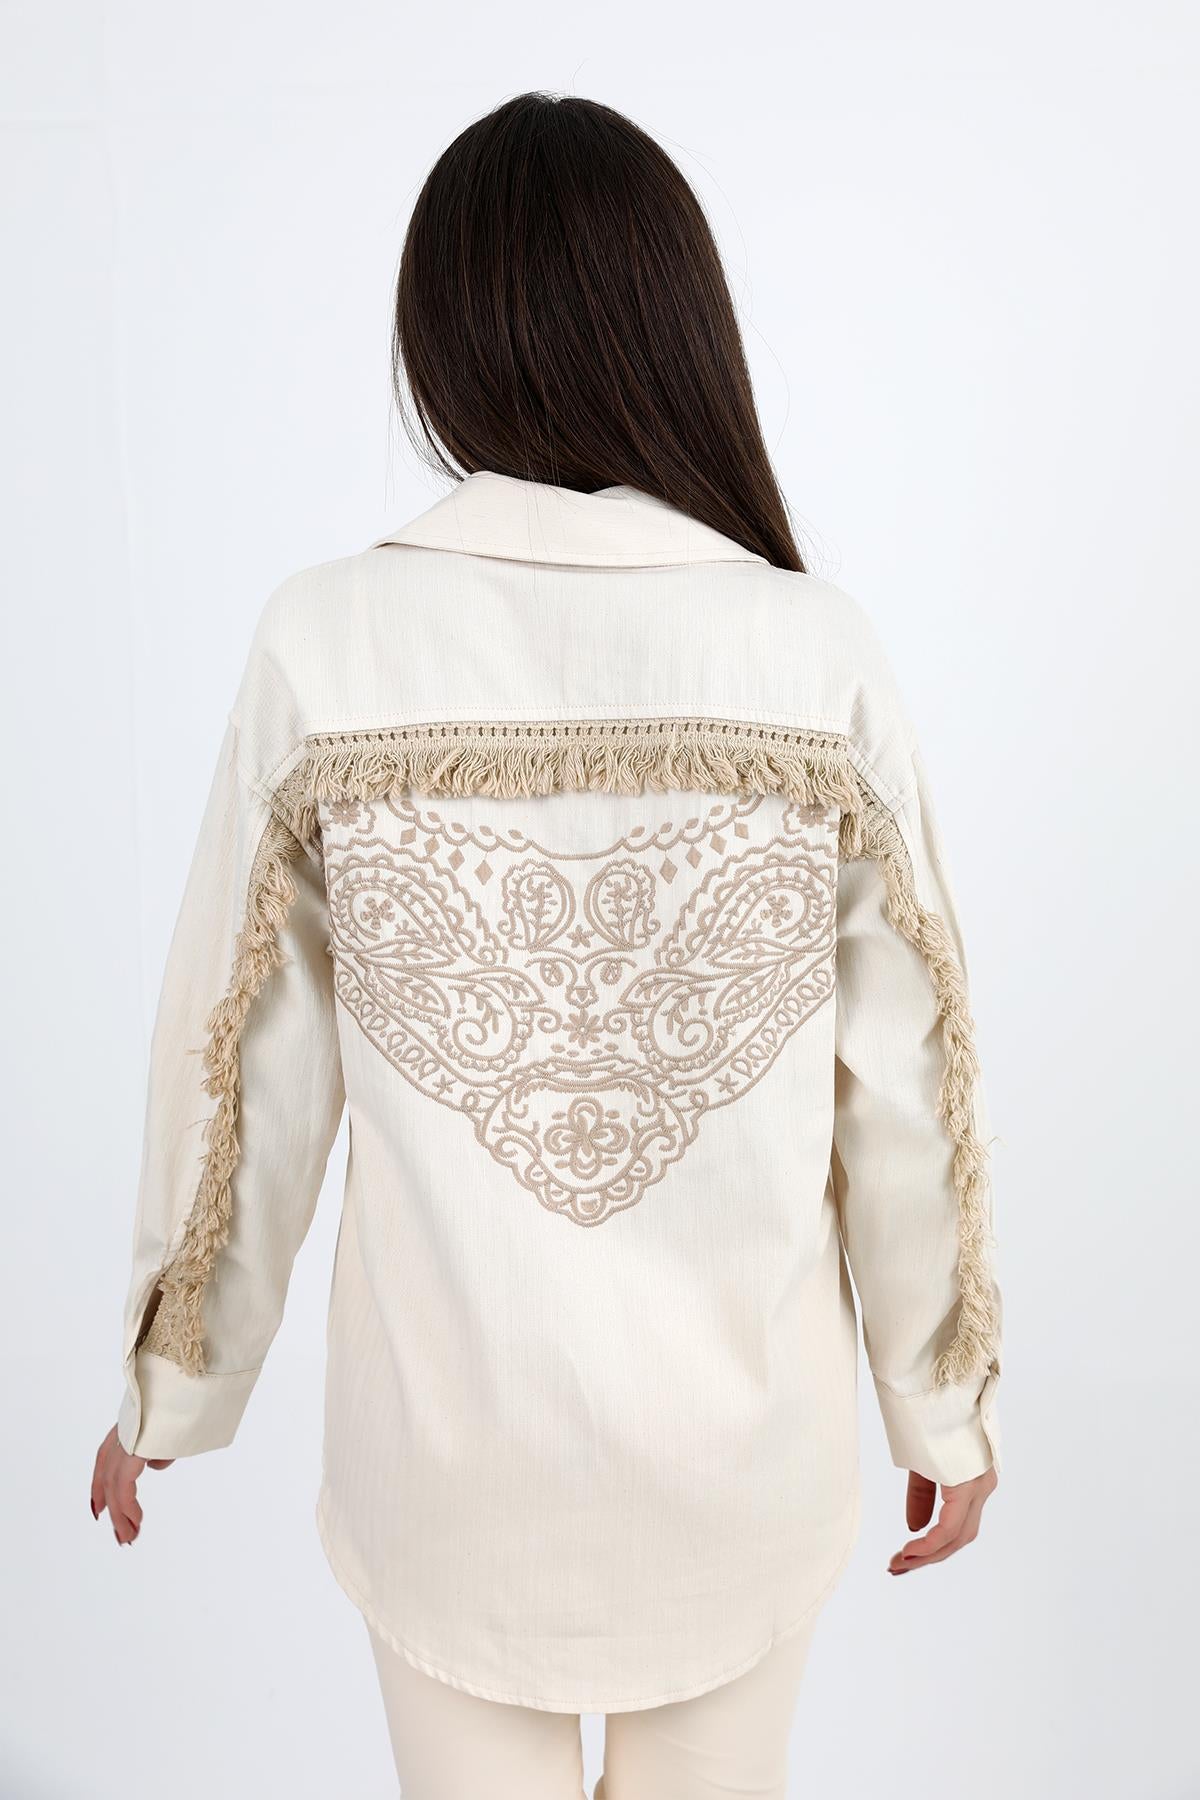 Women's Shirt Gabardine with Embroidered Tassels on the Back - Beige - STREETMODE ™